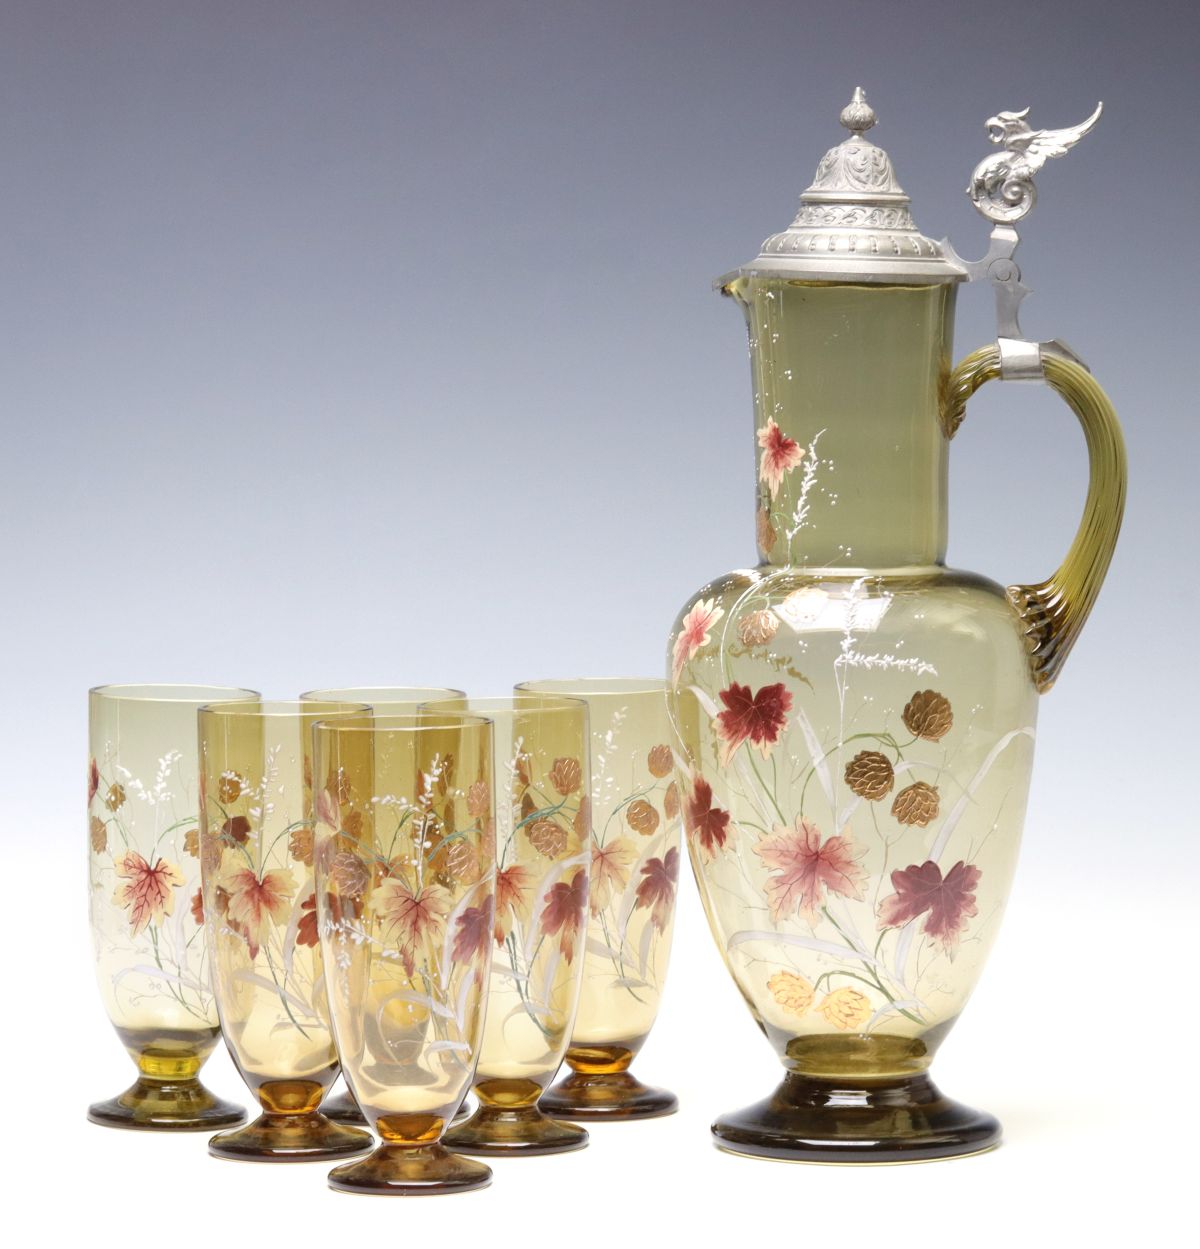 A SEVEN PIECE ENAMELED GLASS BOHEMIAN BEER SERVICE